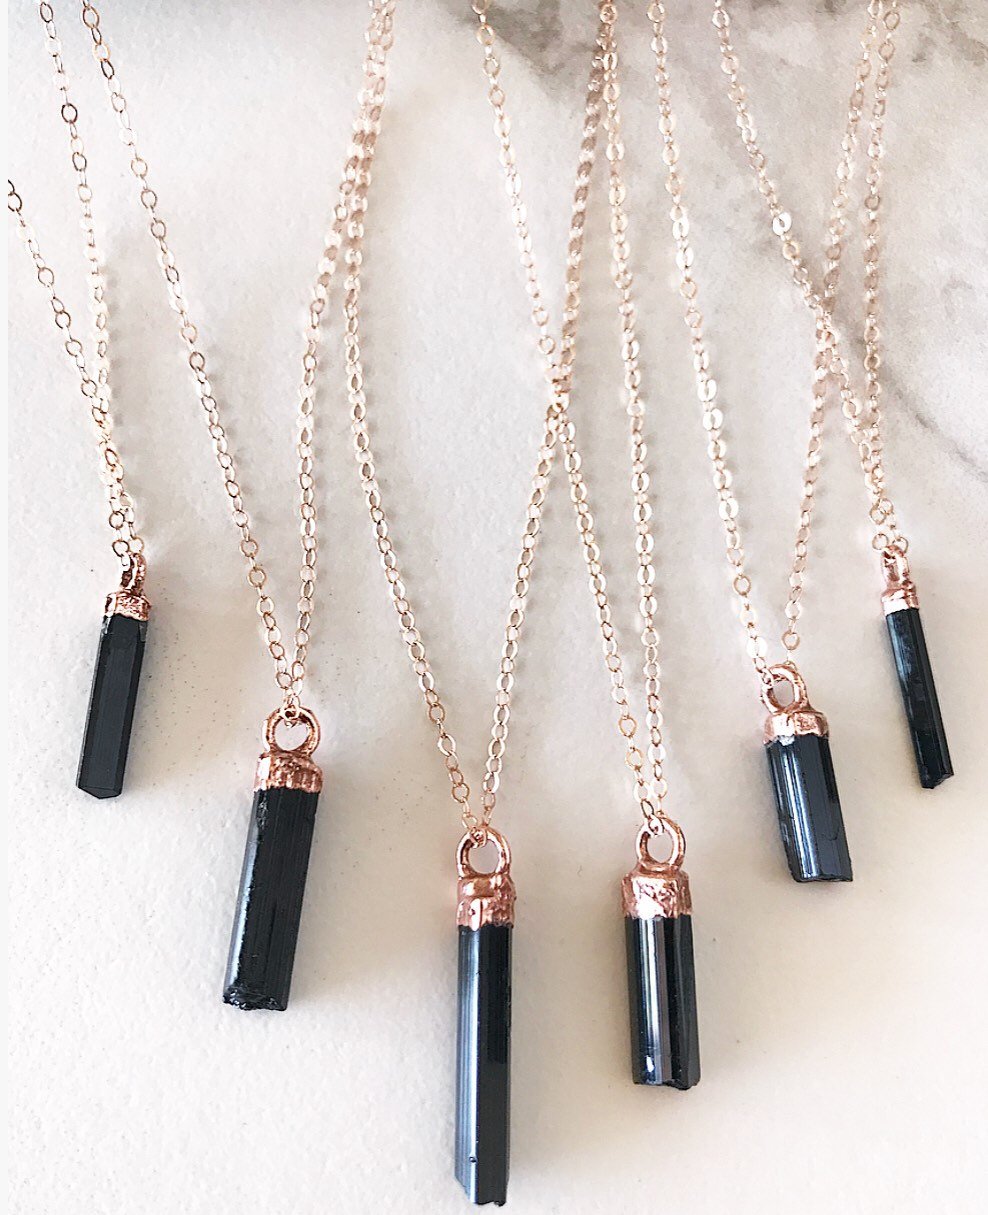 Buy Raw Black Tourmaline Necklace Energy Cleansing Grounding Necklace  Spiritual Shield Protection Necklace Gift for Her Gift for Him Online in  India - Etsy